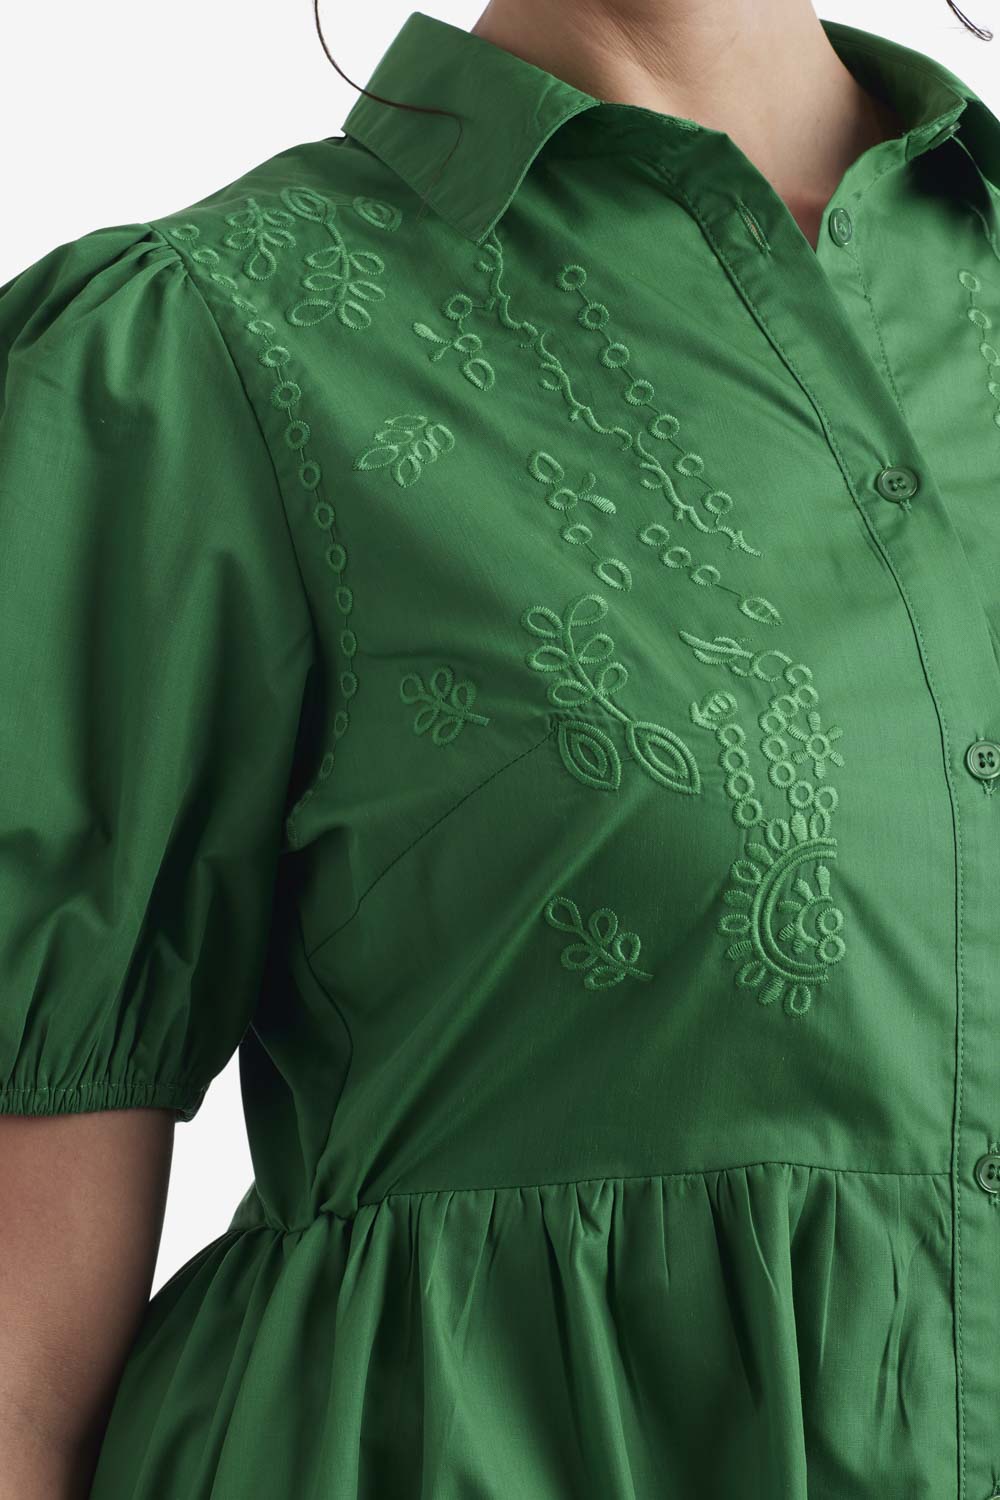 Finley Puff Sleeve Embroidered Green Dress